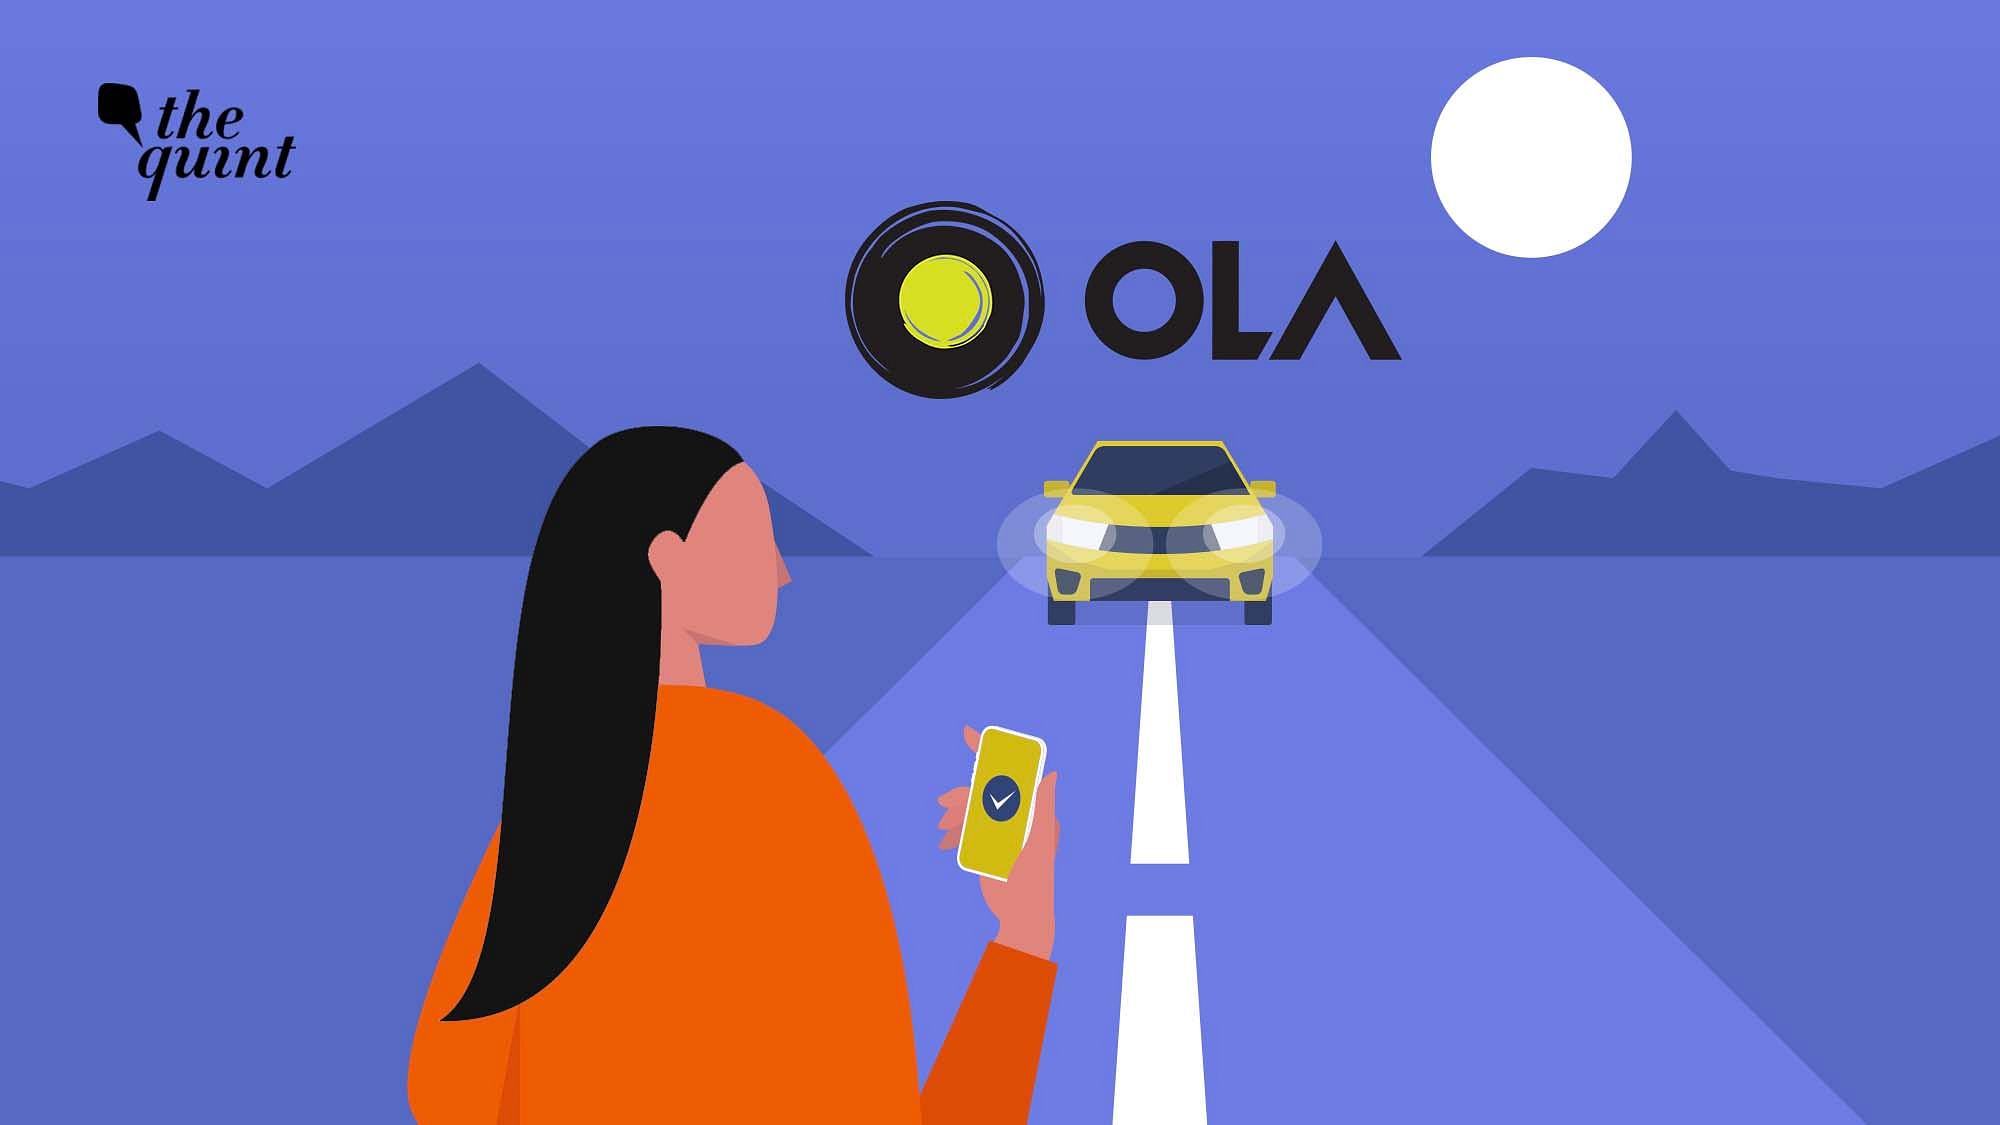 A 32-year-old woman was reportedly forced to disembark from her Ola Cab on the night of 30 September, on an abandoned road near the Kempegowda International Airport in Bengaluru.